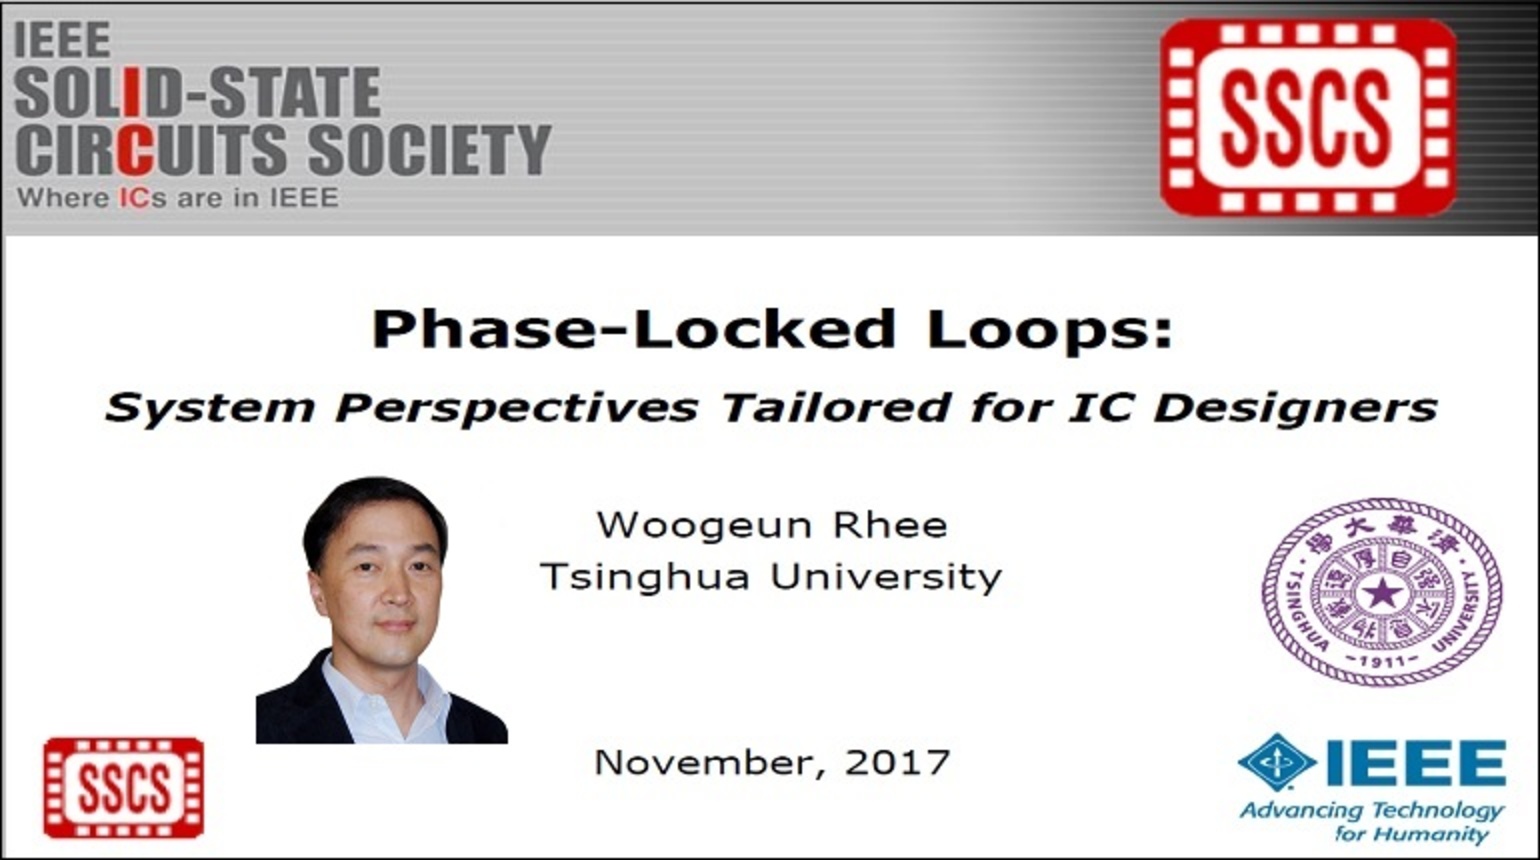 Phase-Locked Loops: System Perspectives Tailored for IC Designers Video